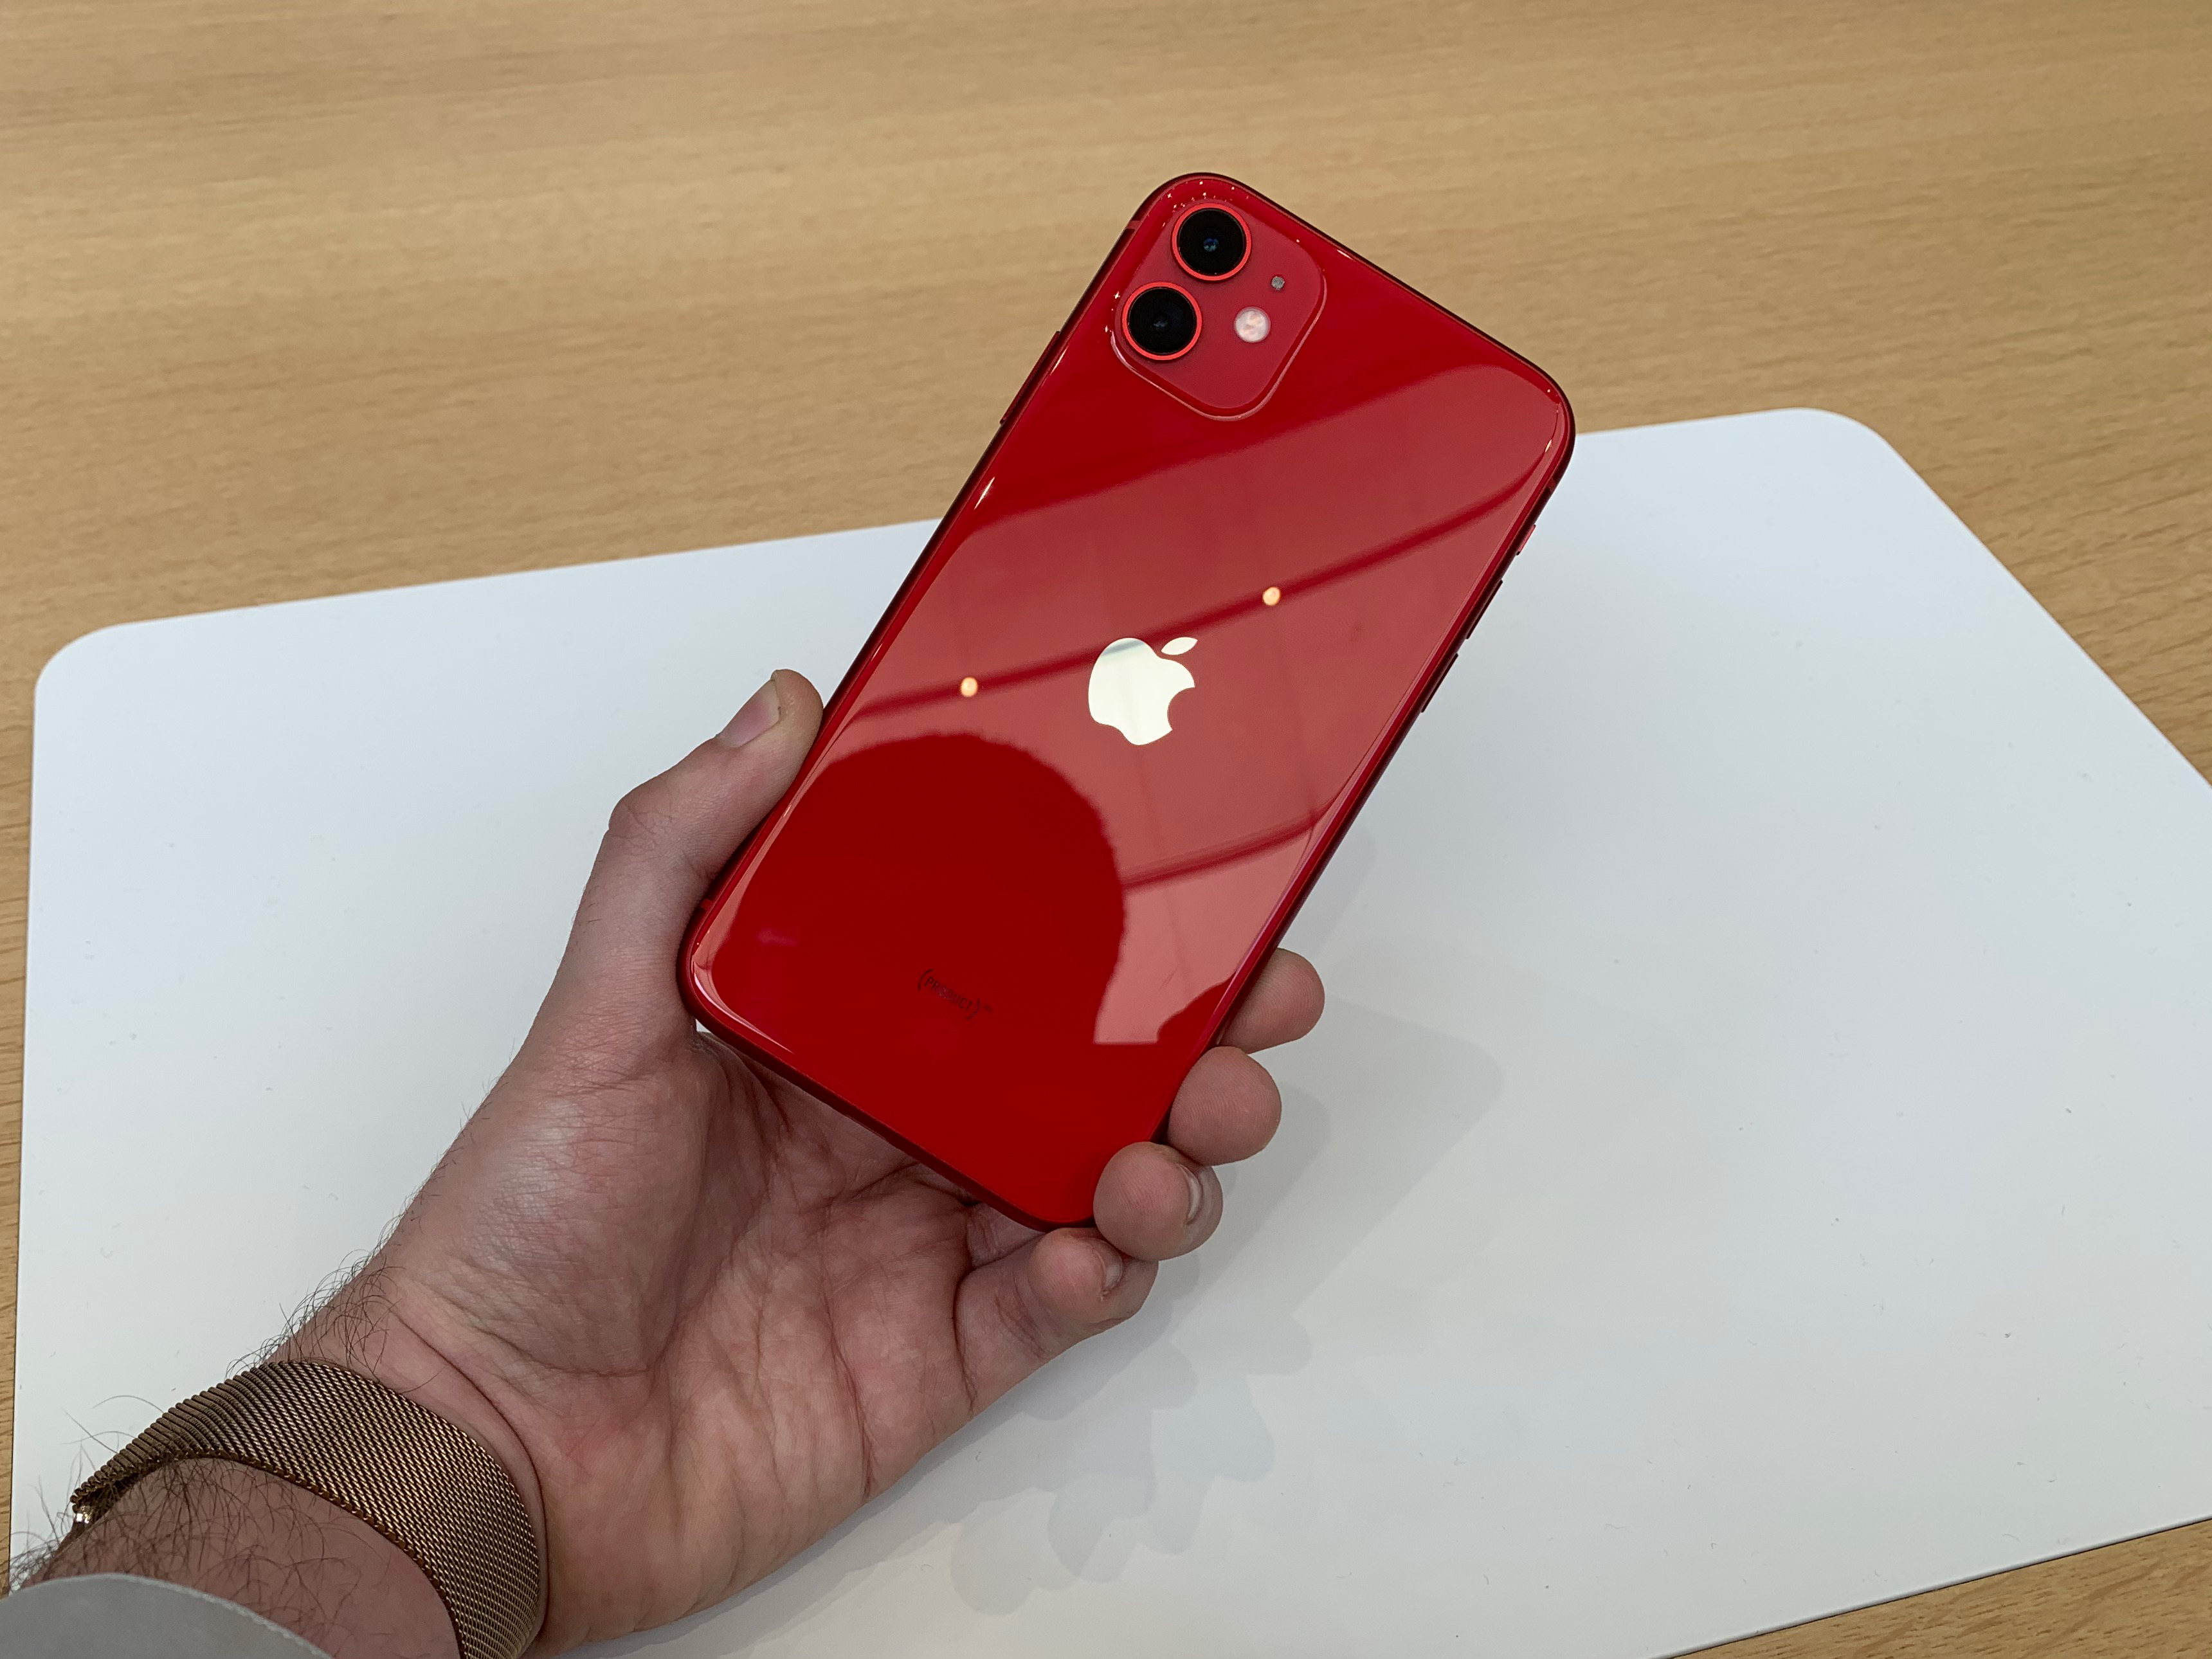 Iphone Buyer S Guide Iphone 11 11 Pro 11 Pro Max Xr Or 8 Cnn Underscored